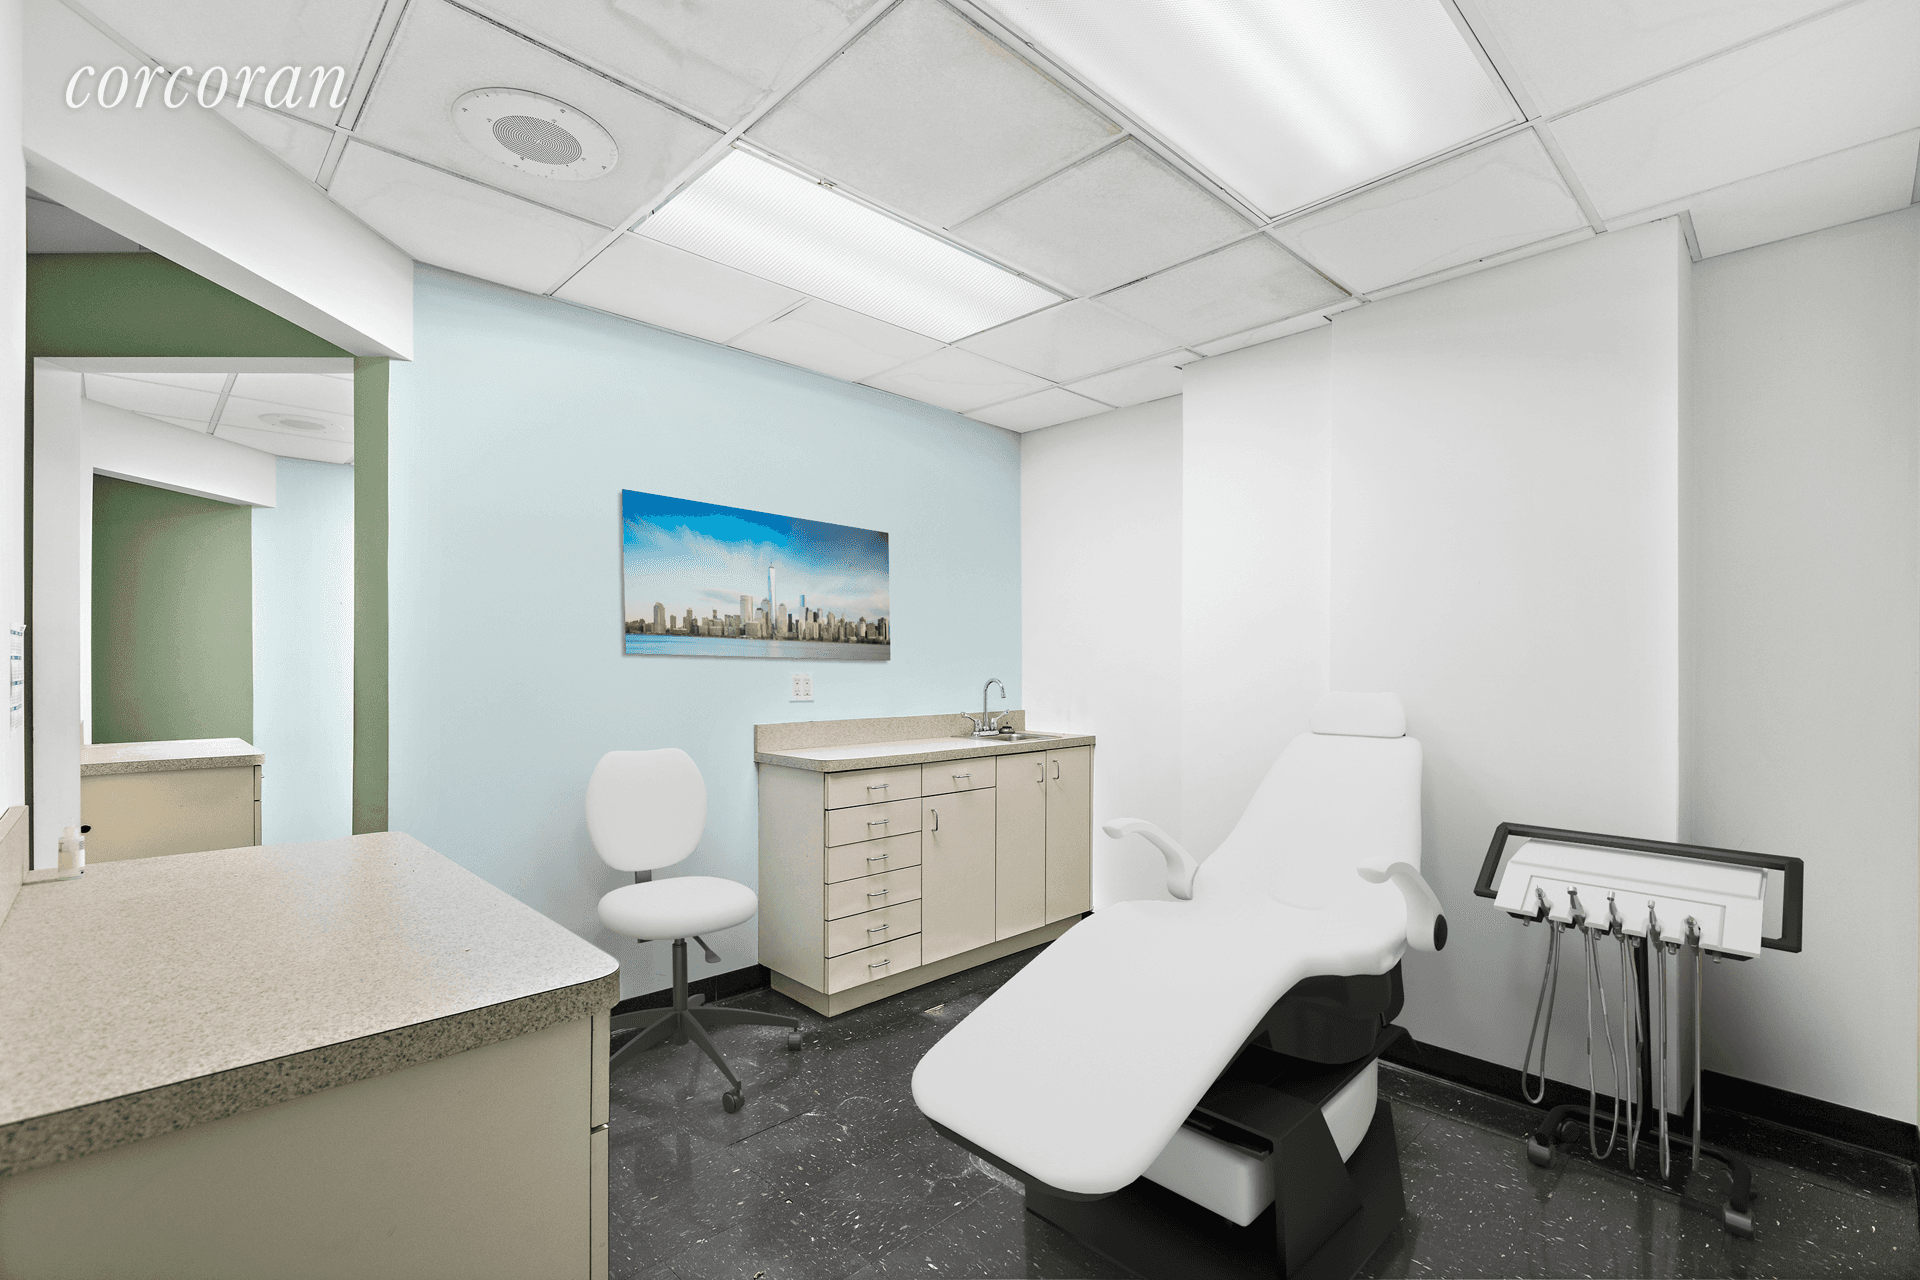 Medical office located on the ground floor of a residential condominium with separate street entrance.